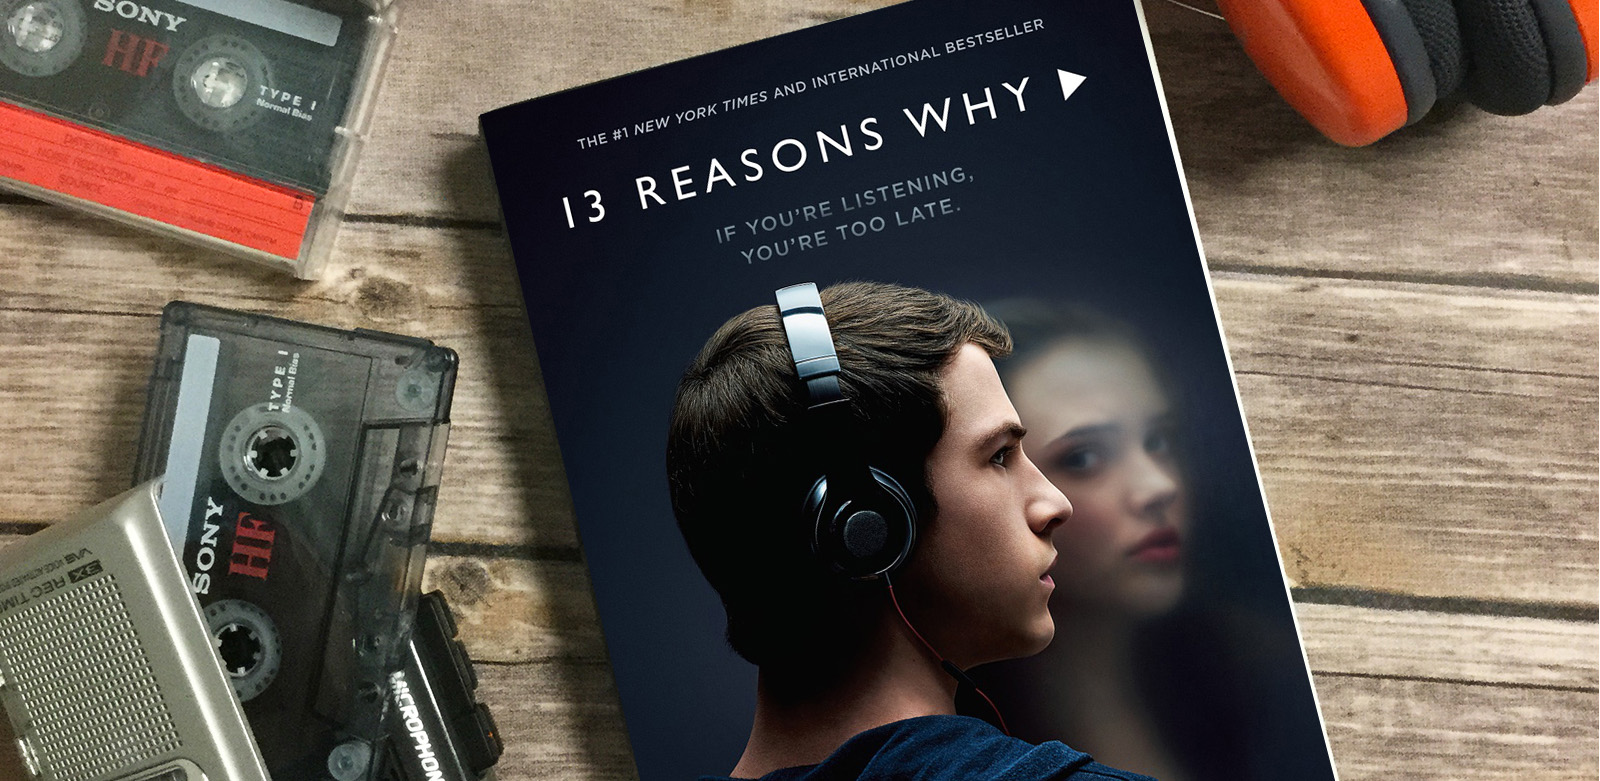 will there be a 13 reasons why season 2